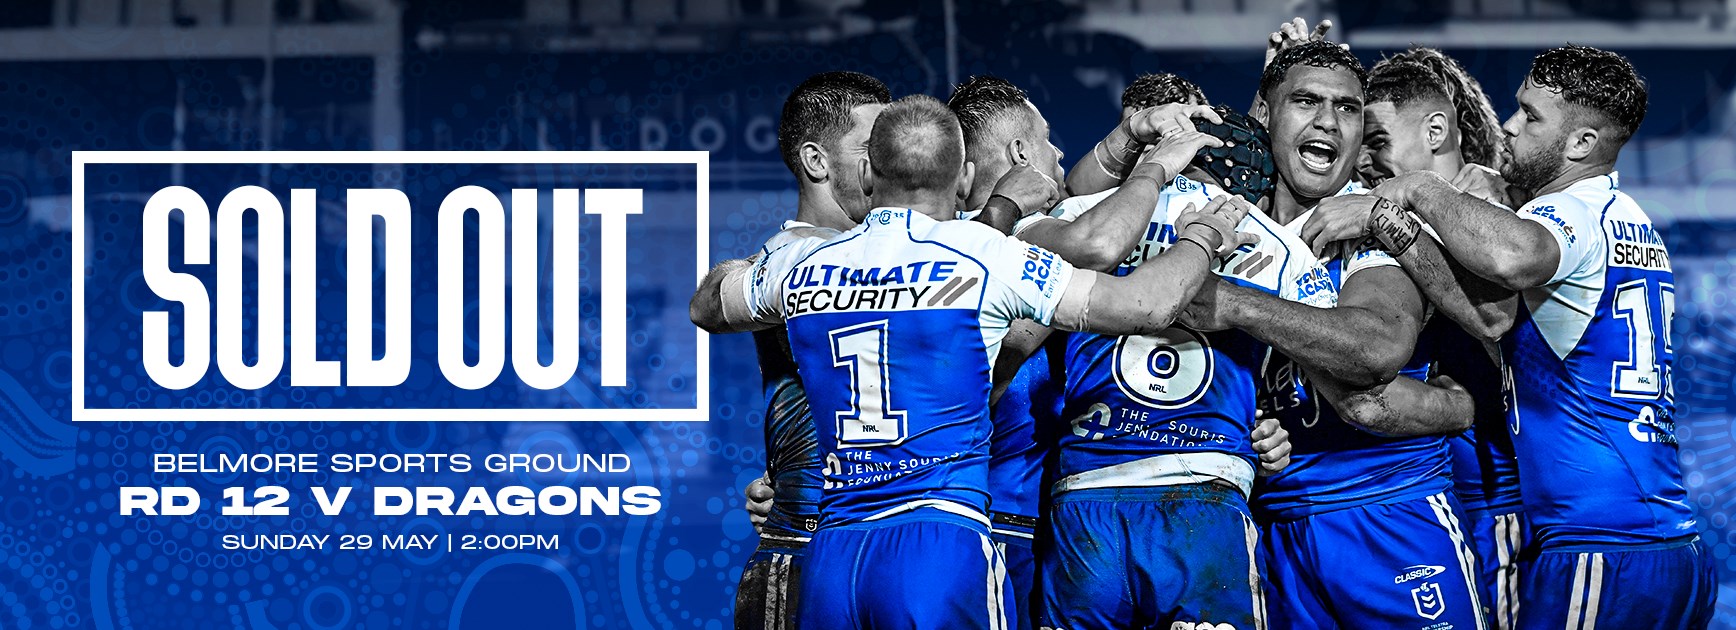 Tickets sold out for our return to Belmore fixture